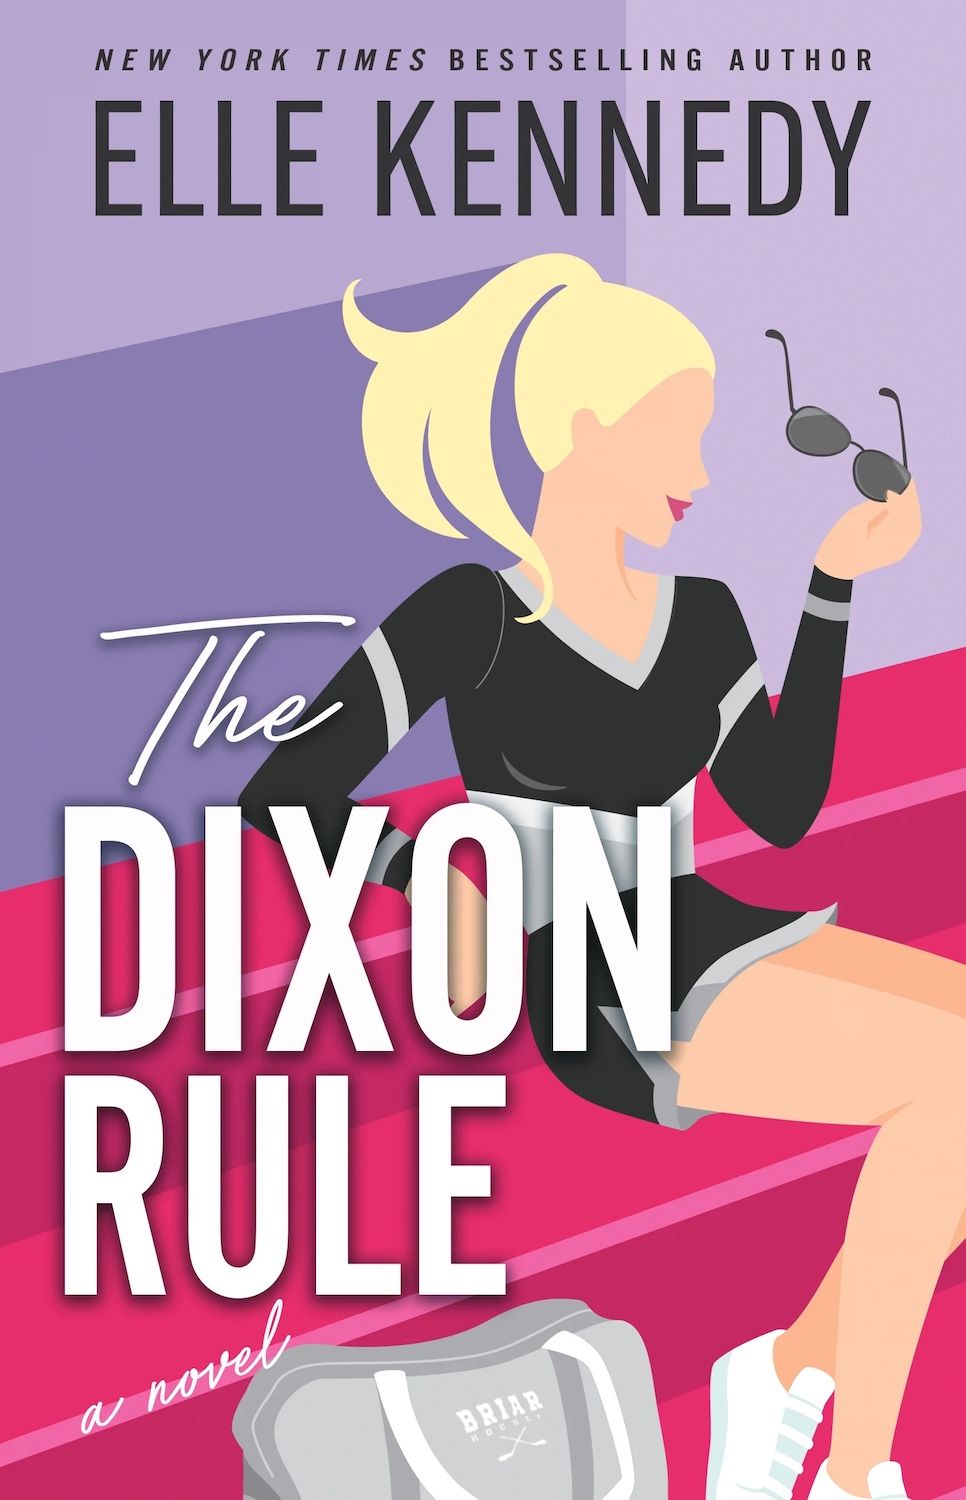 Download The Dixon Rule PDF by Elle Kennedy